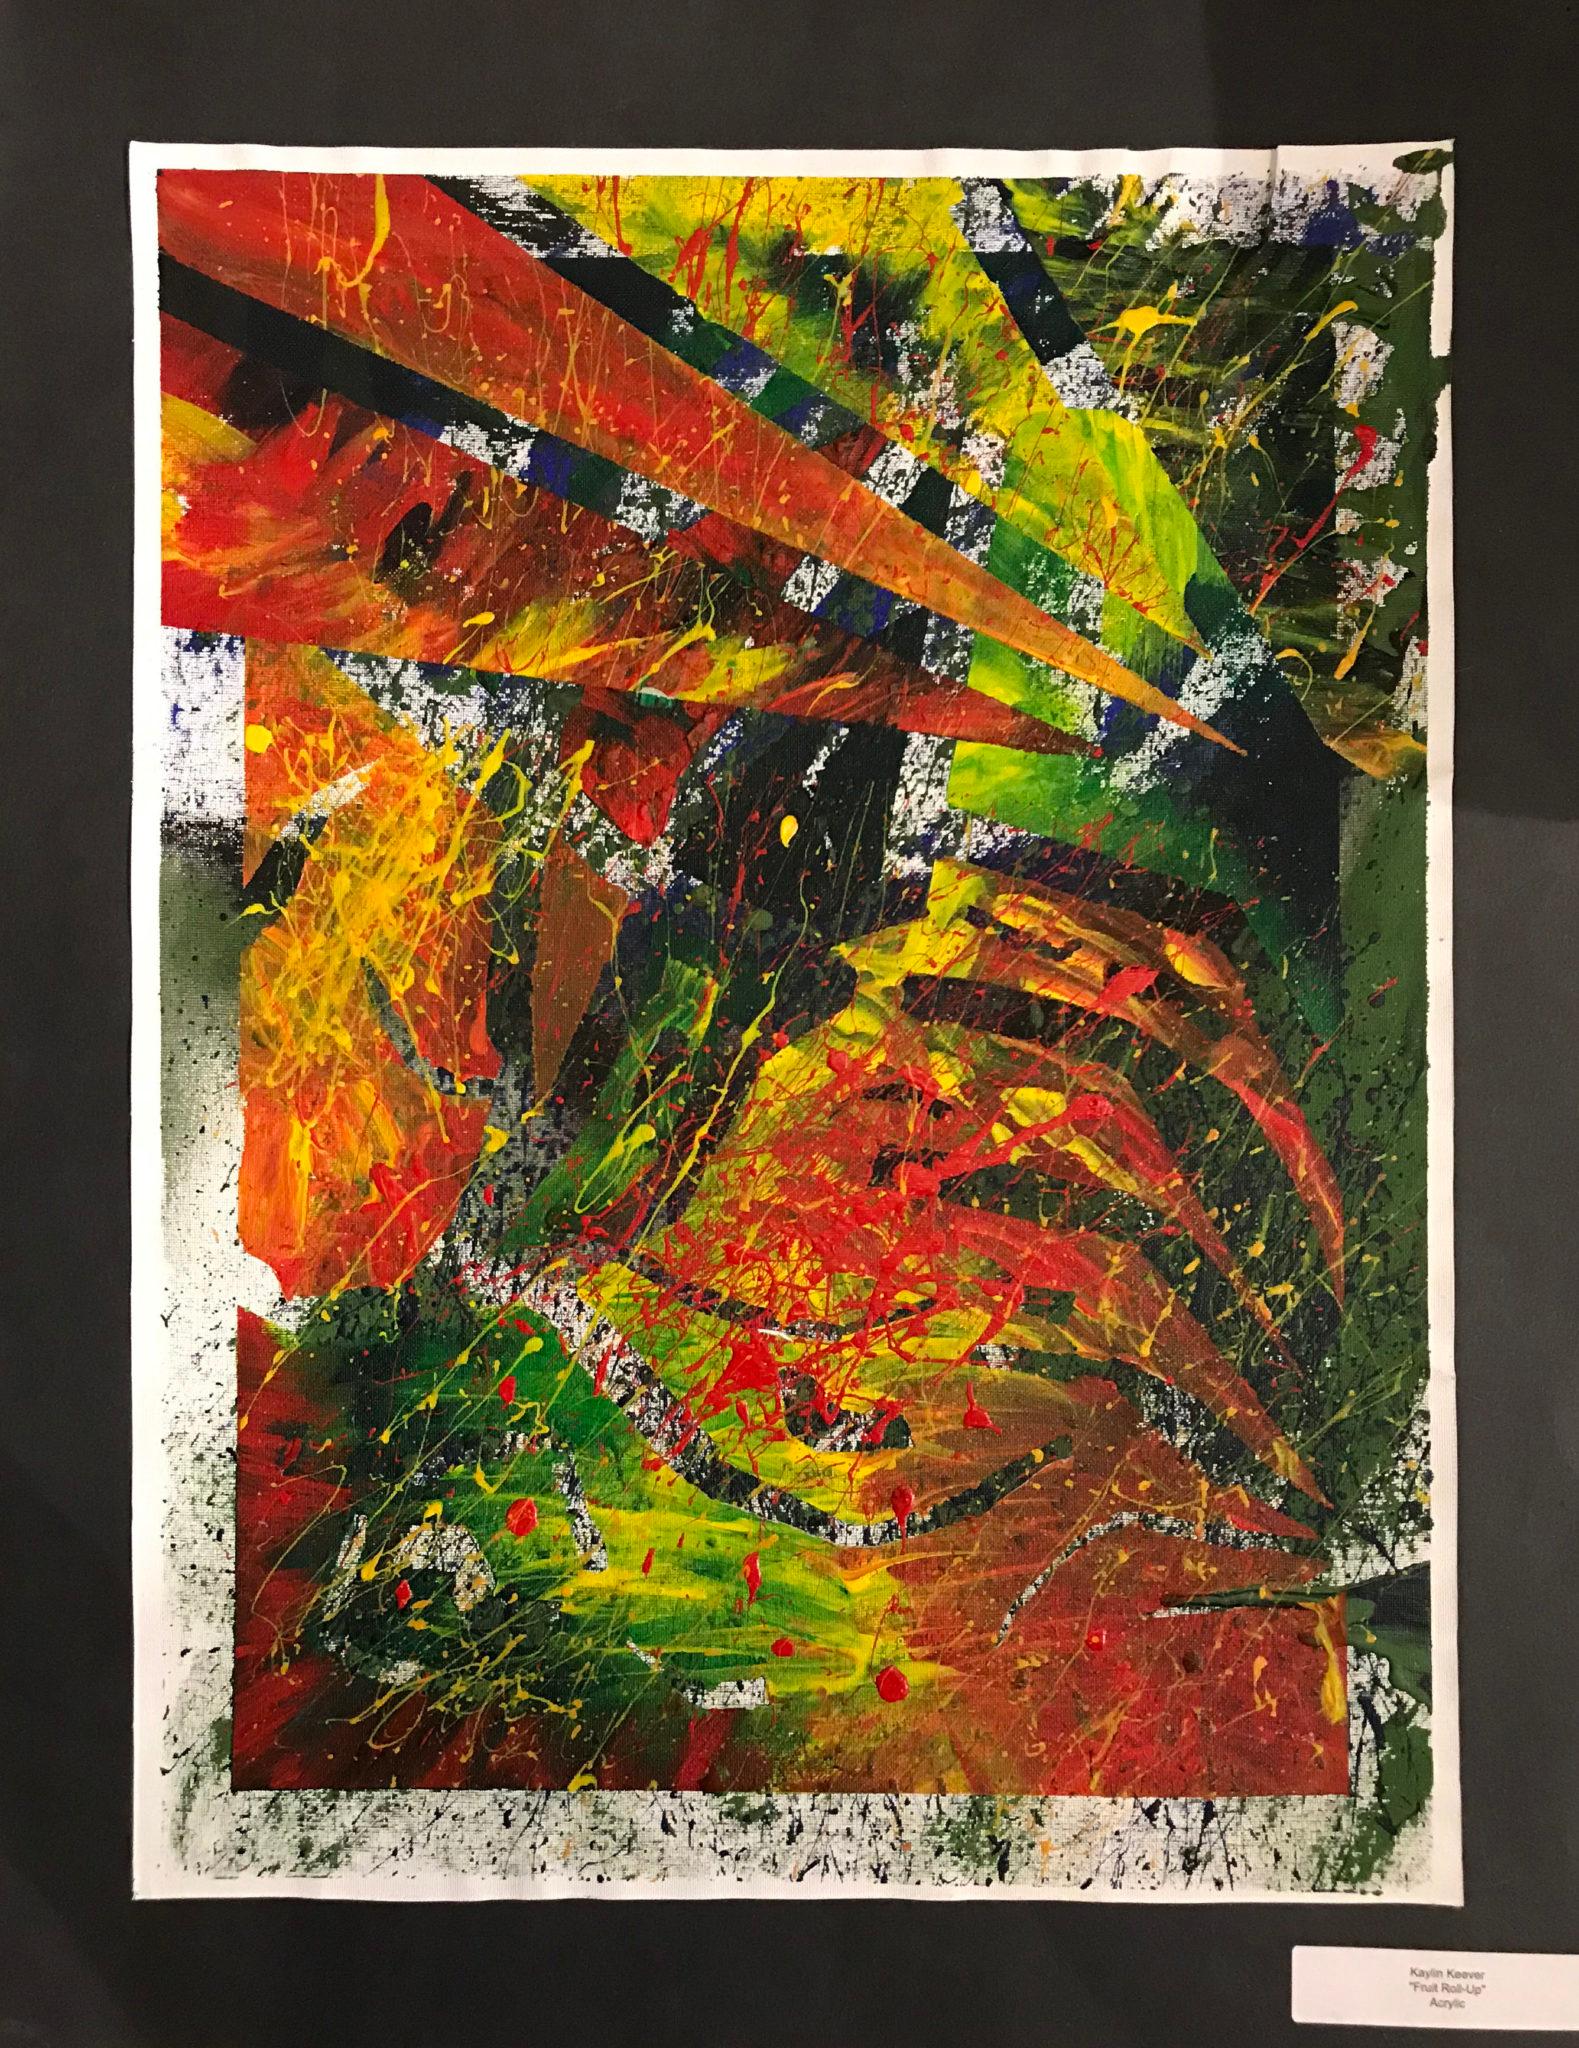 Mixed Media Painting by Kaylin Keever Entitled “Fruit Rollup”  Mixed Media on Paper  Depicts stunning colorful abstract expressionist view of fruit rollups  Signed and titled by the artist in the lower right margin of the image, and titled by the